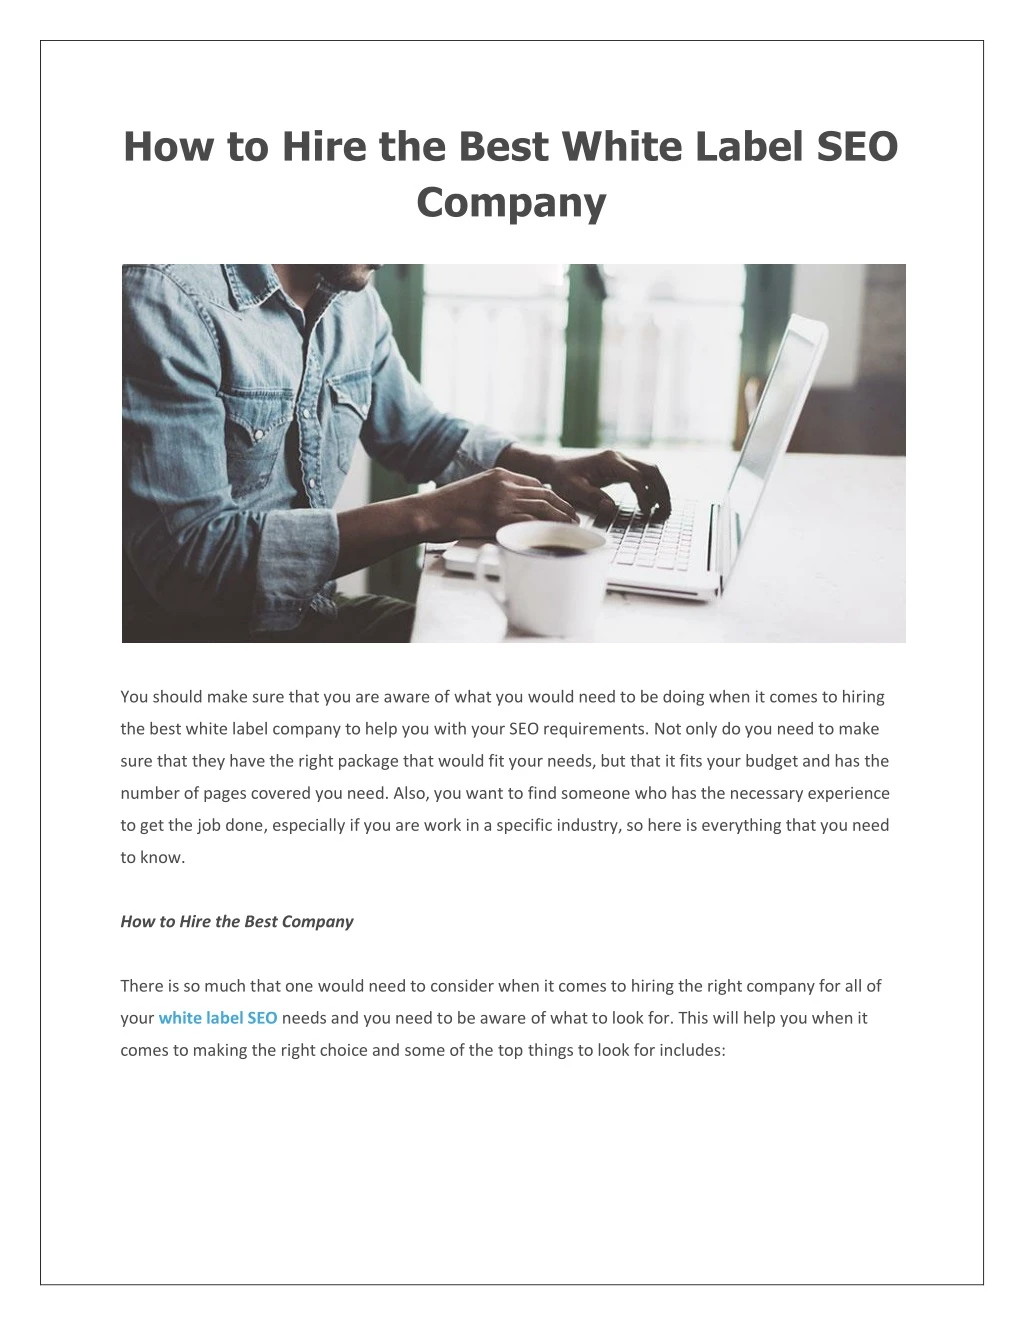 how to hire the best white label seo company